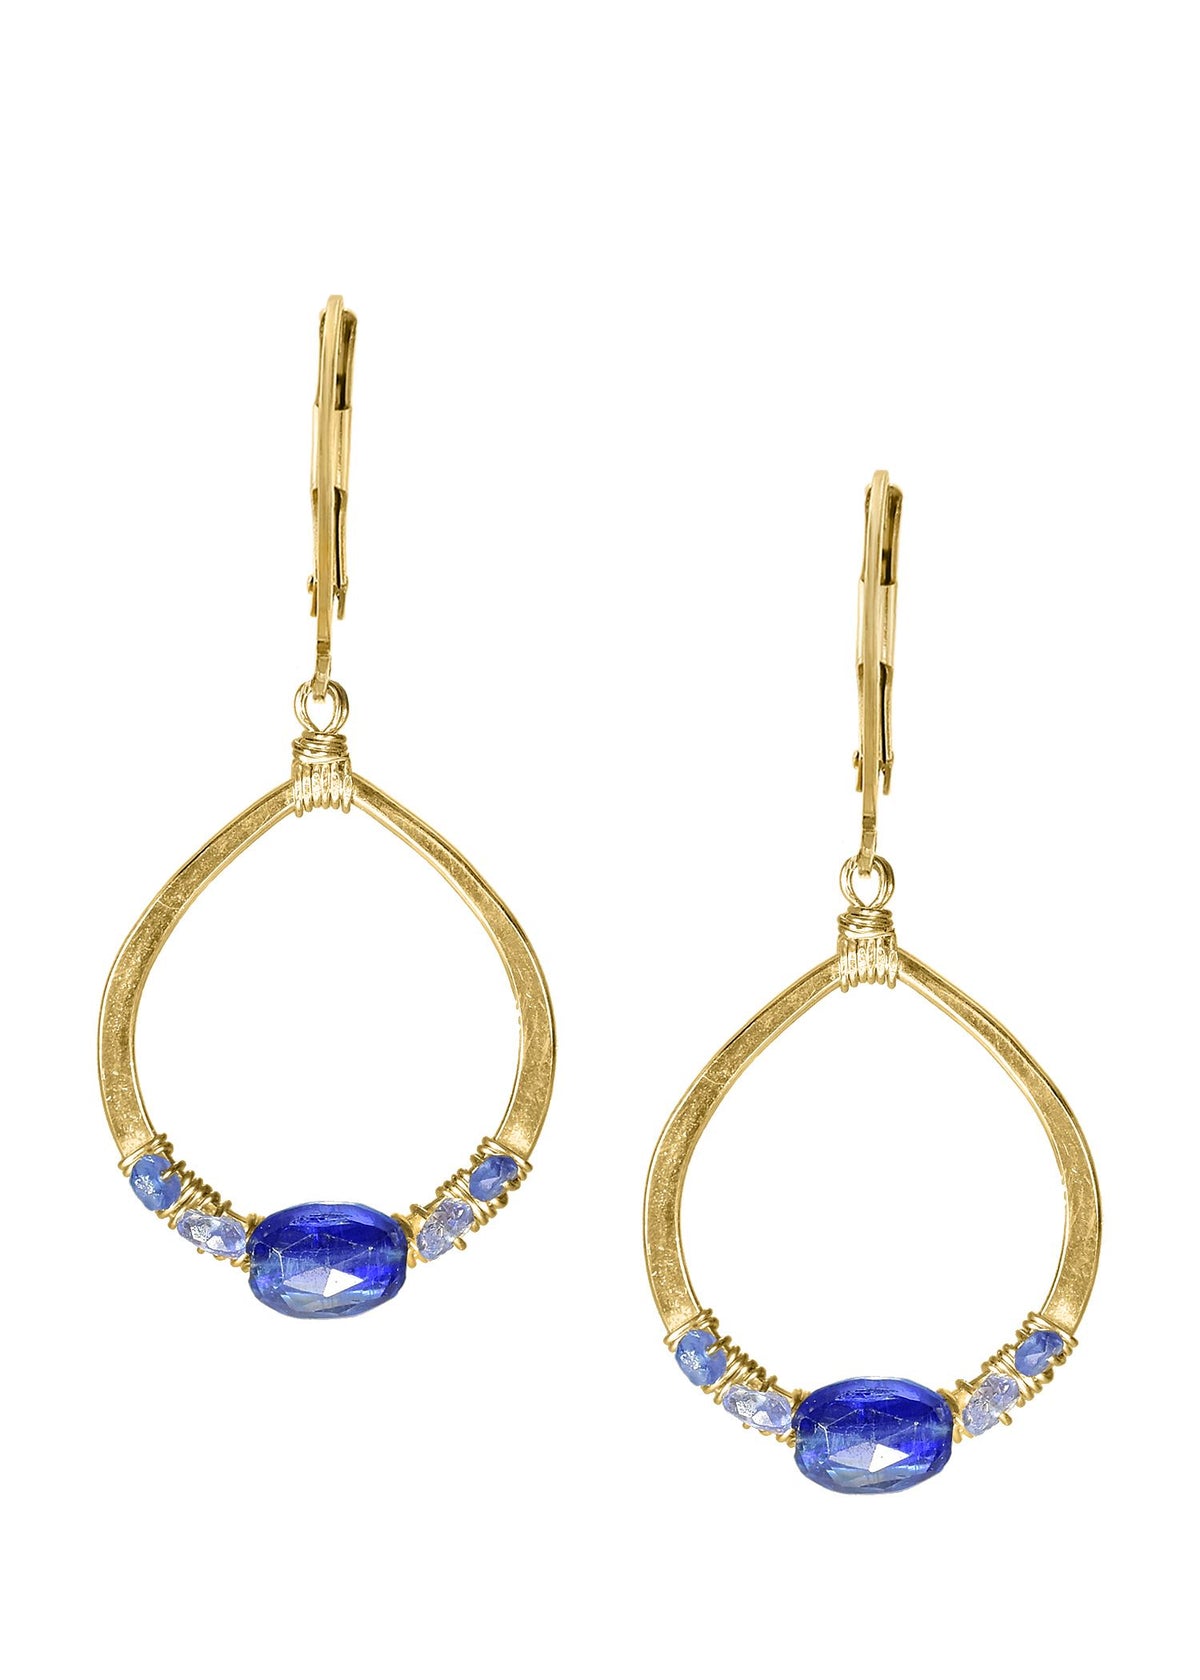 Blue sapphire Kyanite Tanzanite 14k gold fill Earrings measure 1-1/2&quot; in length (including the levers) and 5/8&quot; in width Handmade in our Los Angeles studio